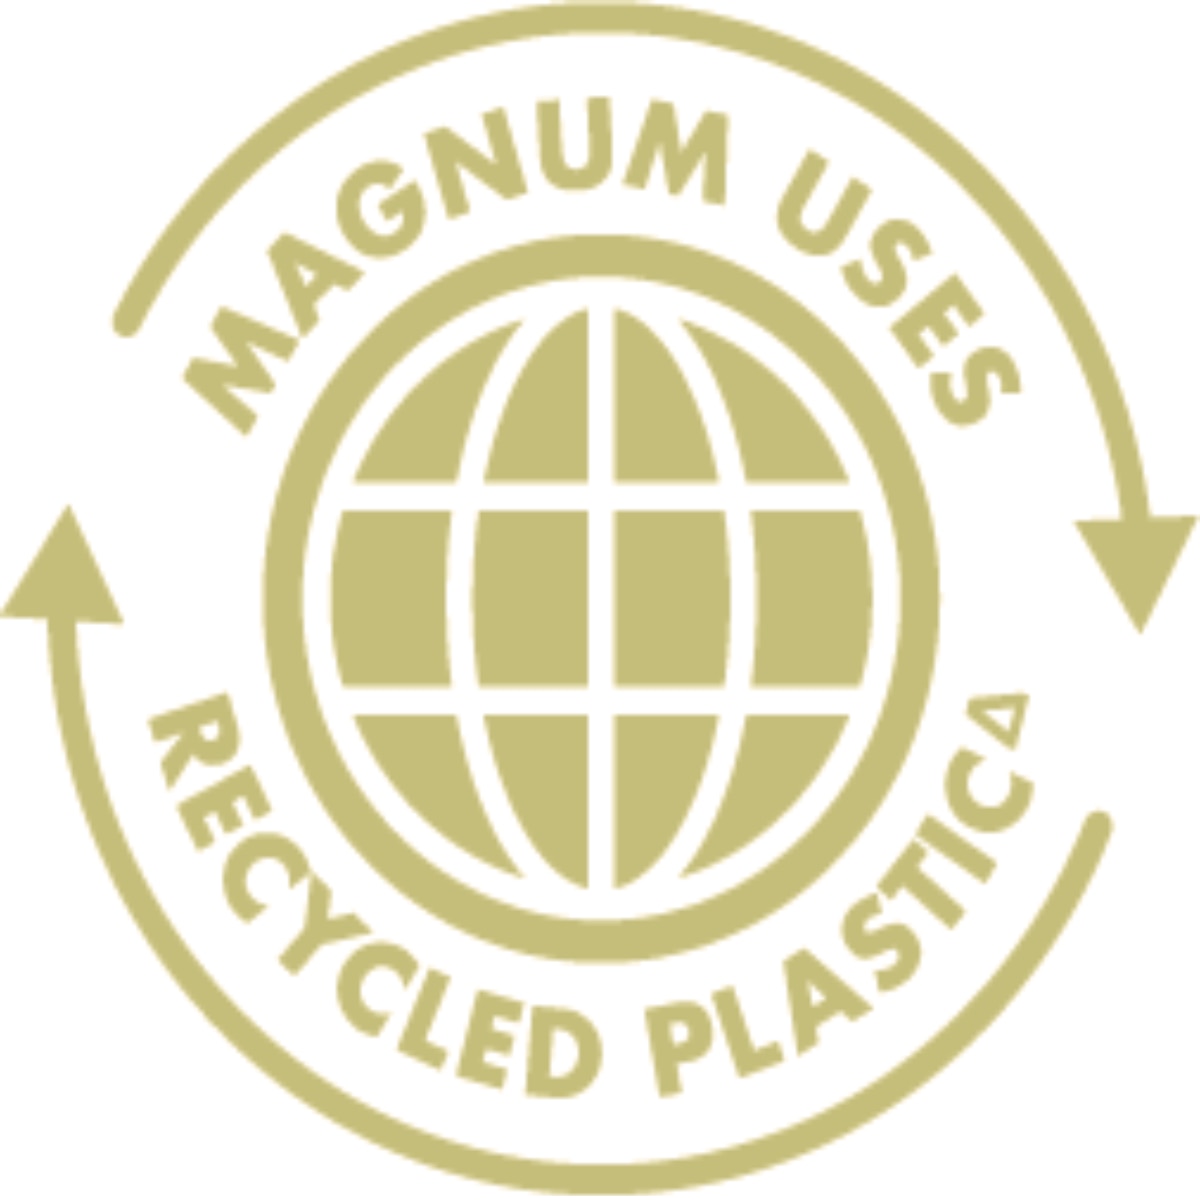 Magnum uses recycled plastic logo